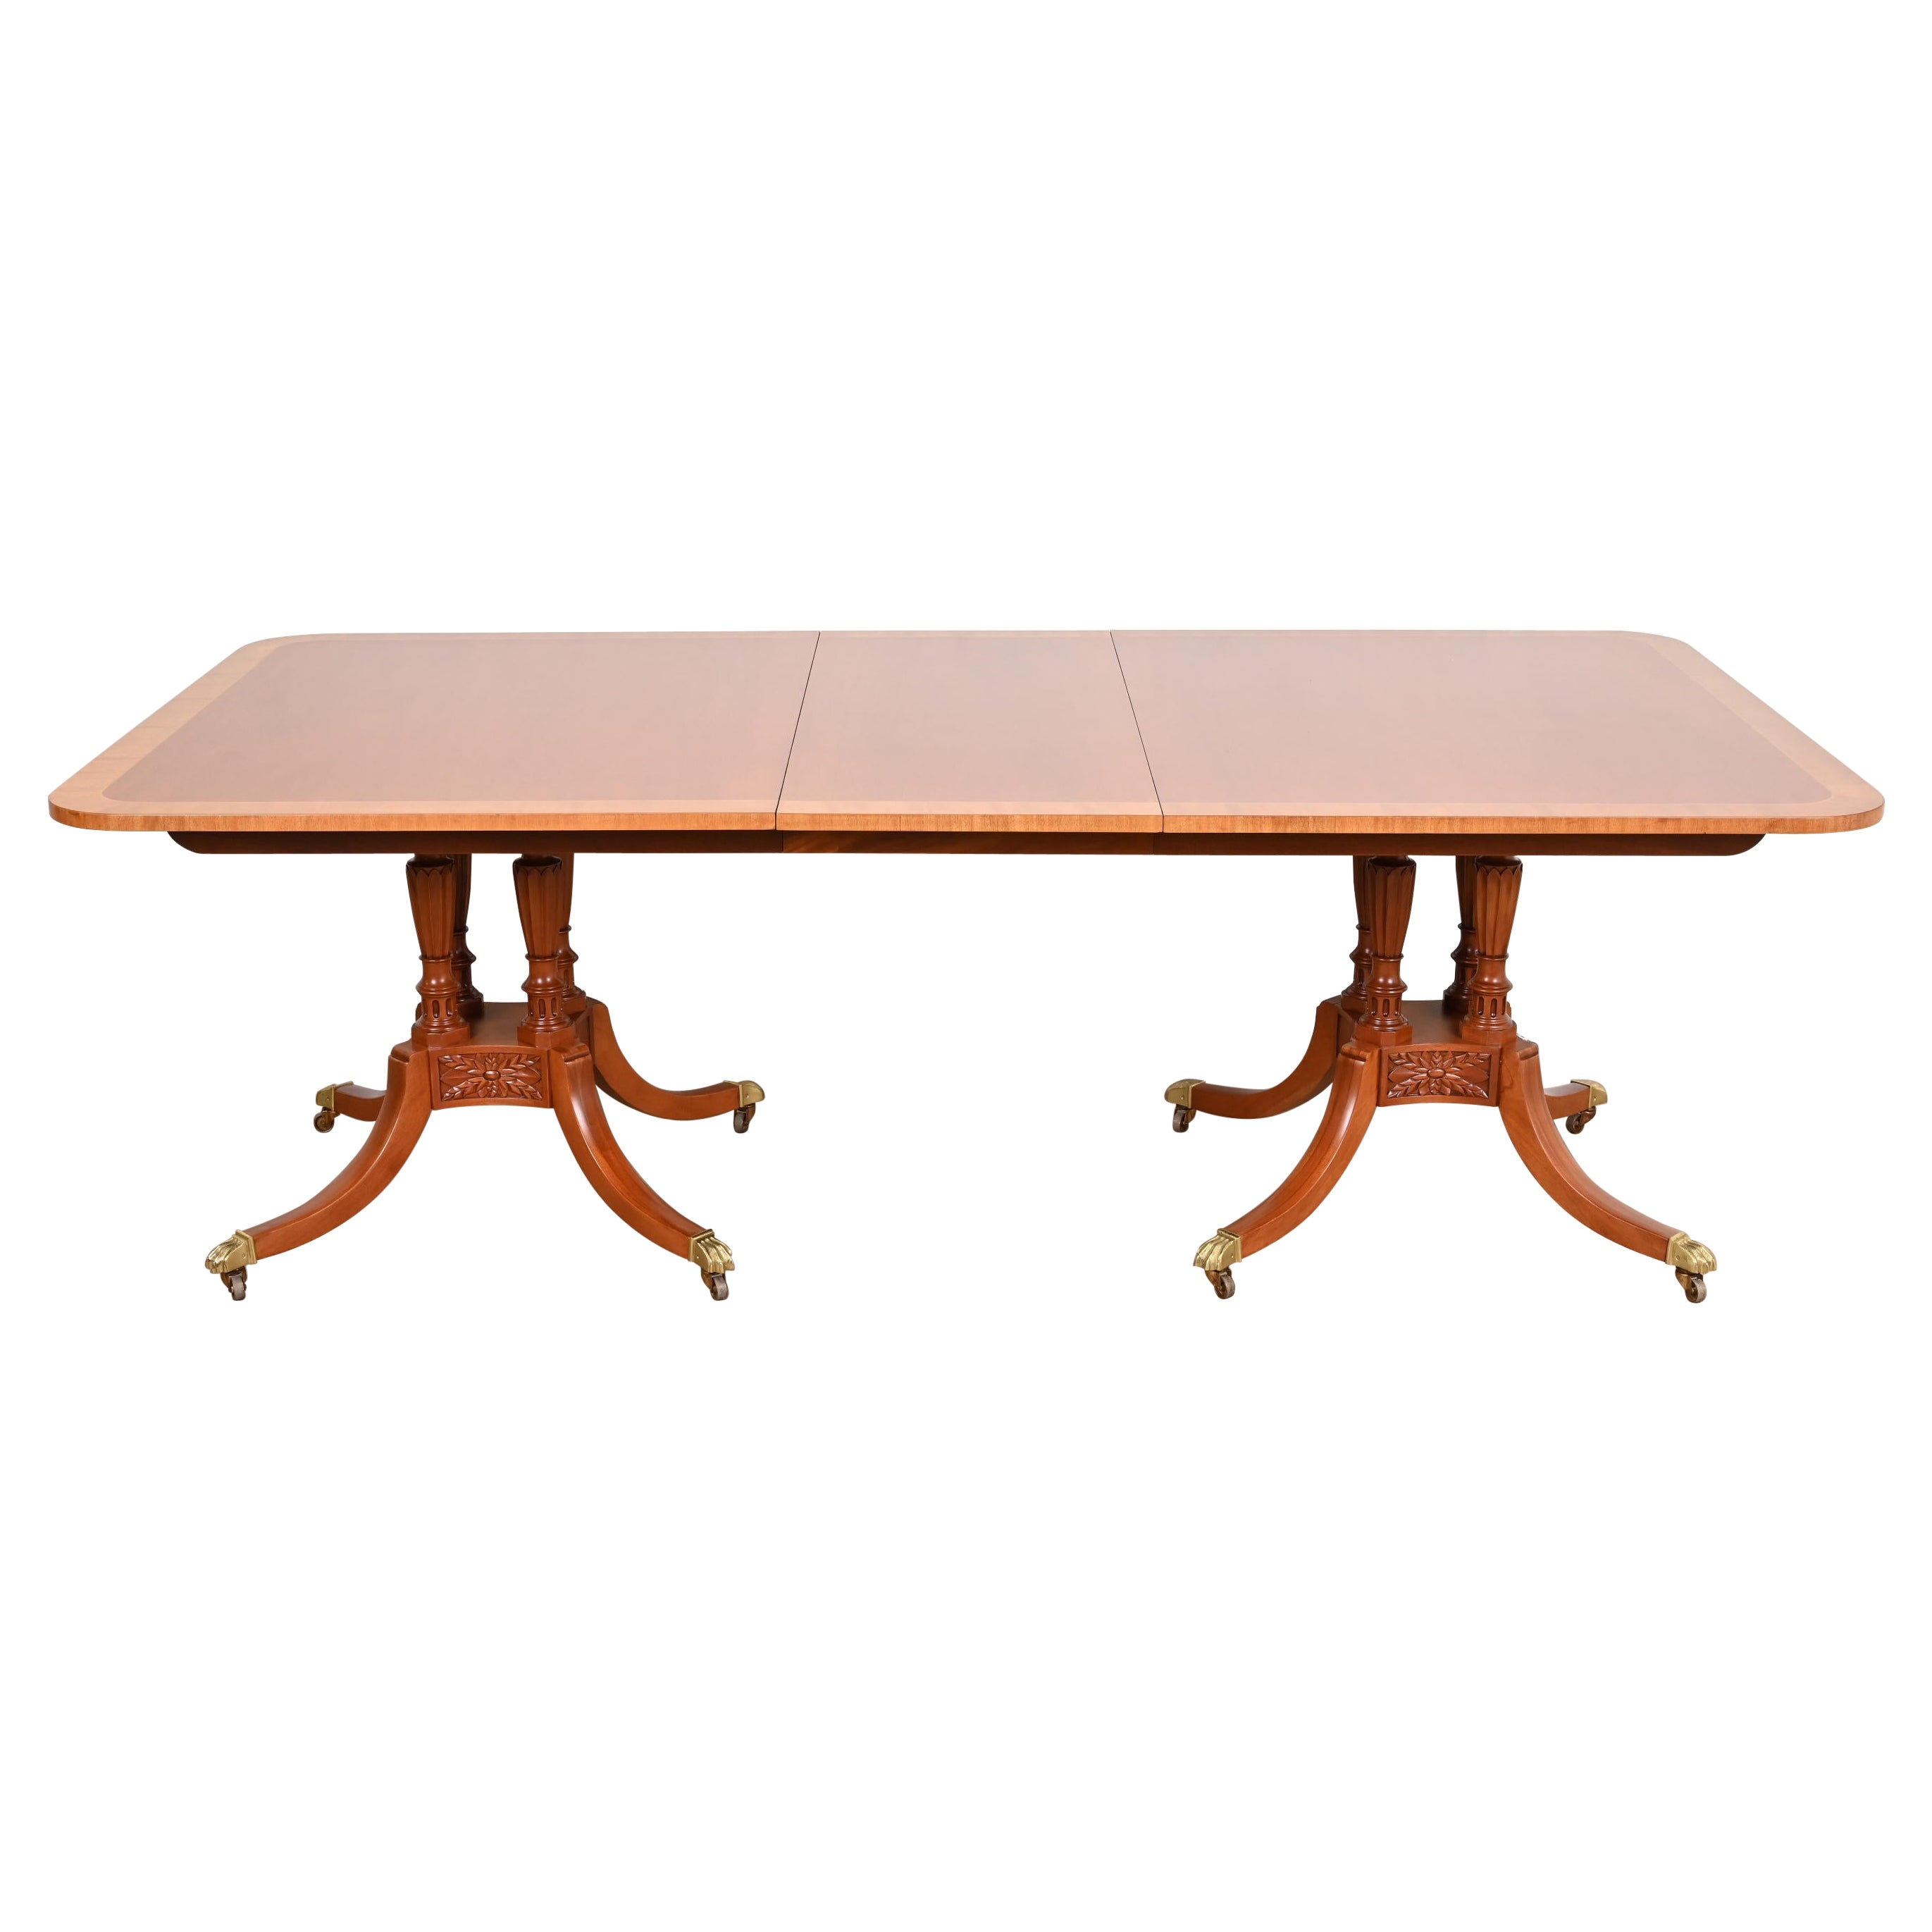 Baker Furniture Georgian Mahogany Double Pedestal Dining Table, Newly Refinished For Sale